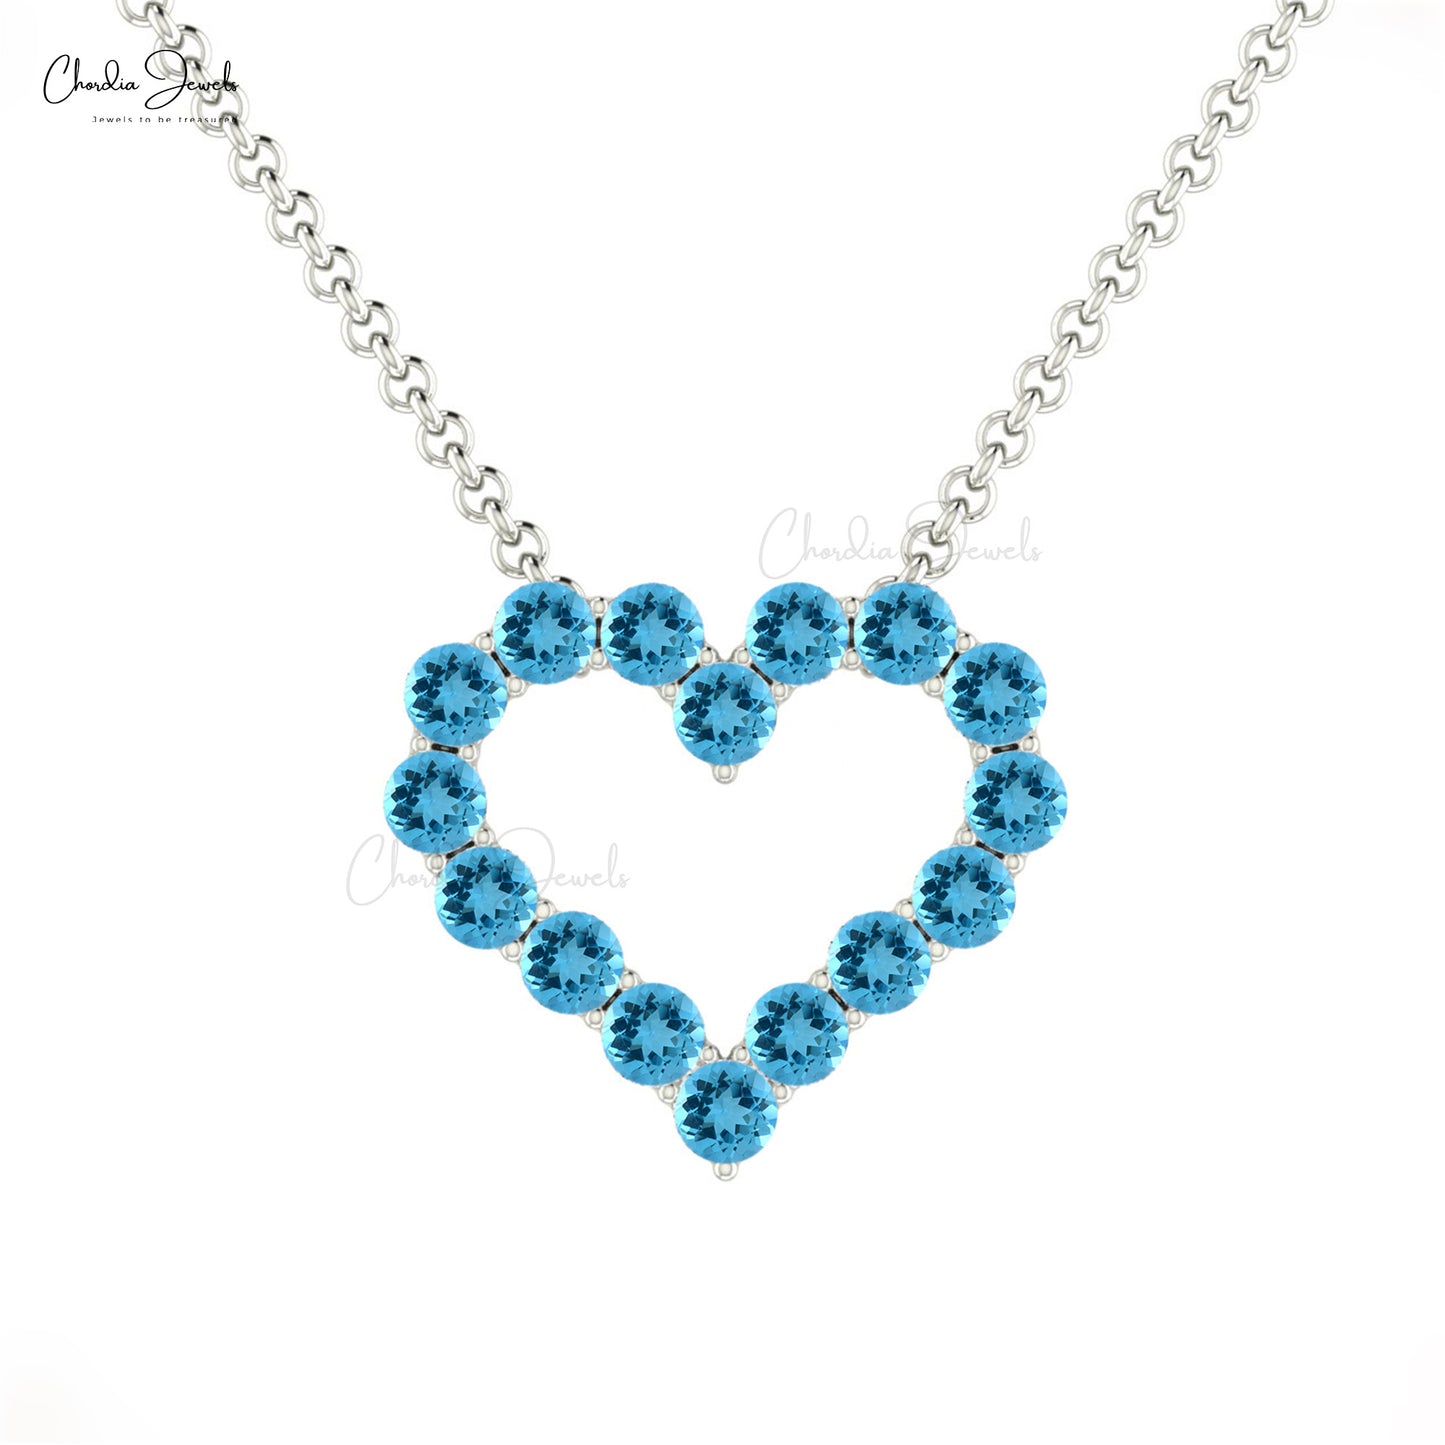 Trendy Round Gemstone Necklace in 14k Solid Gold Genuine Swiss Blue Topaz Heart Shape Necklace Pendant Bridesmaid Gift